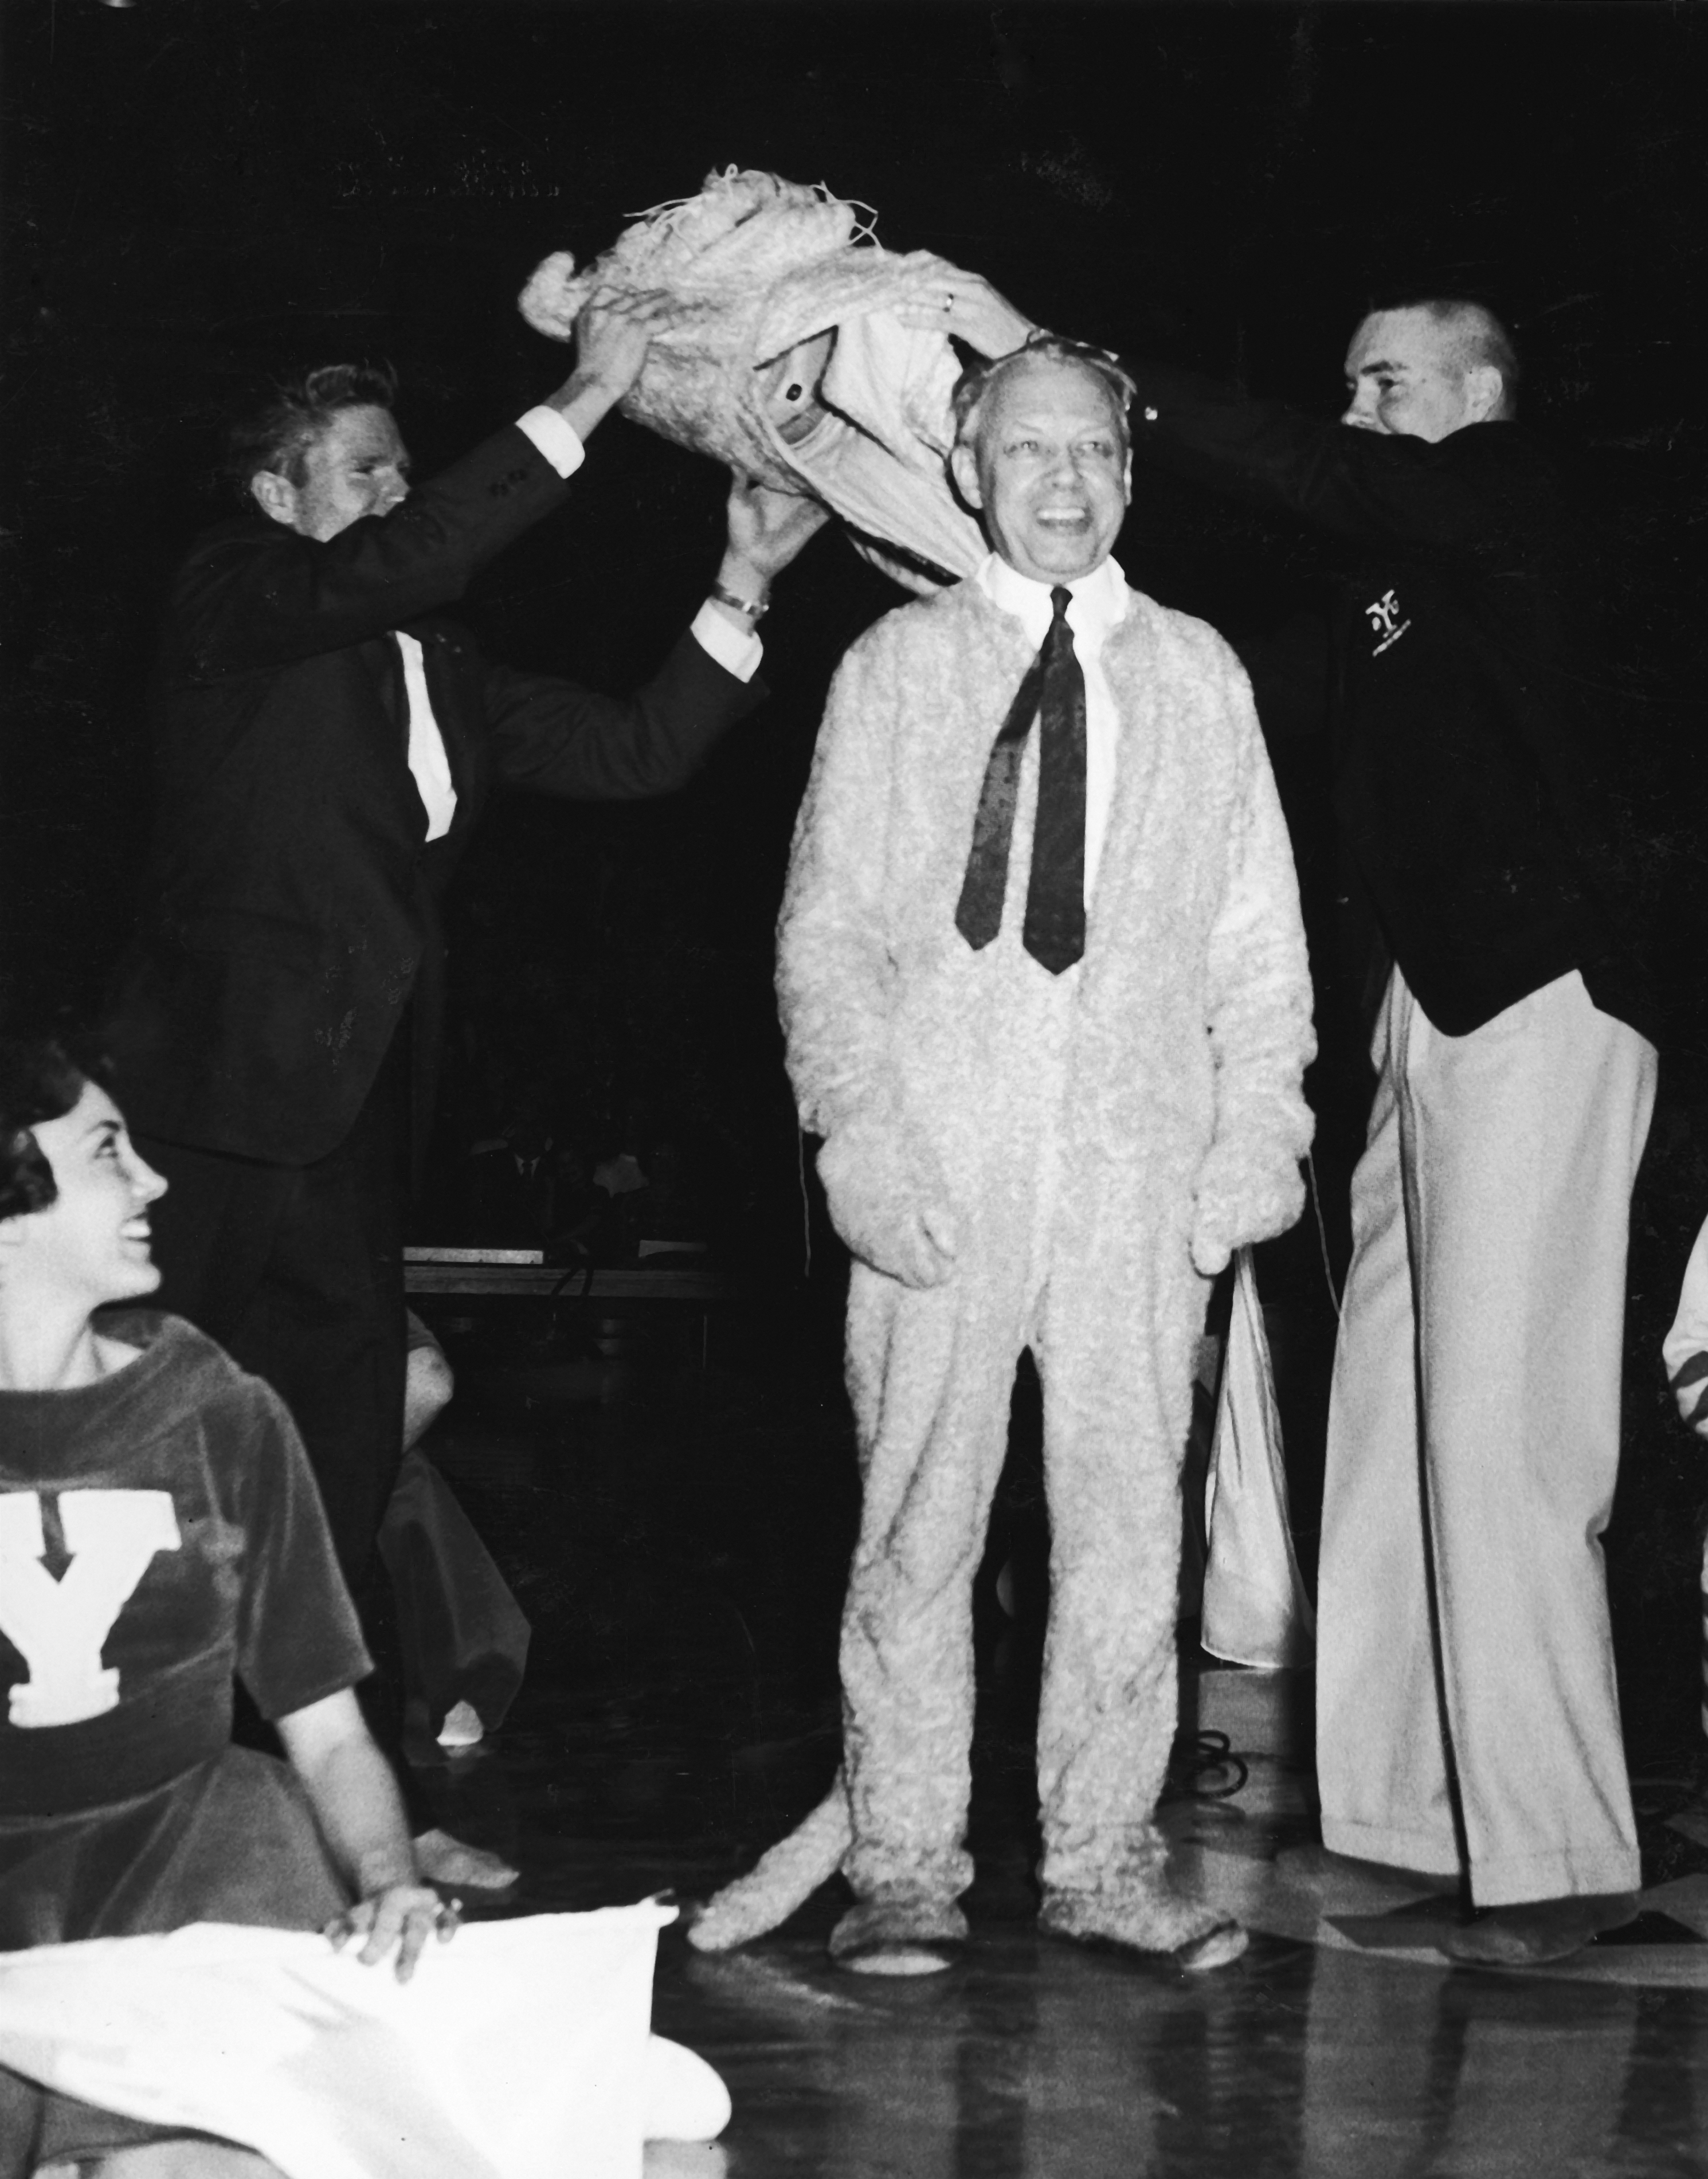 BYU president Ernest L. Wilkinson stands smiling as he is revealed as the man inside the Cosmo mascot suit.